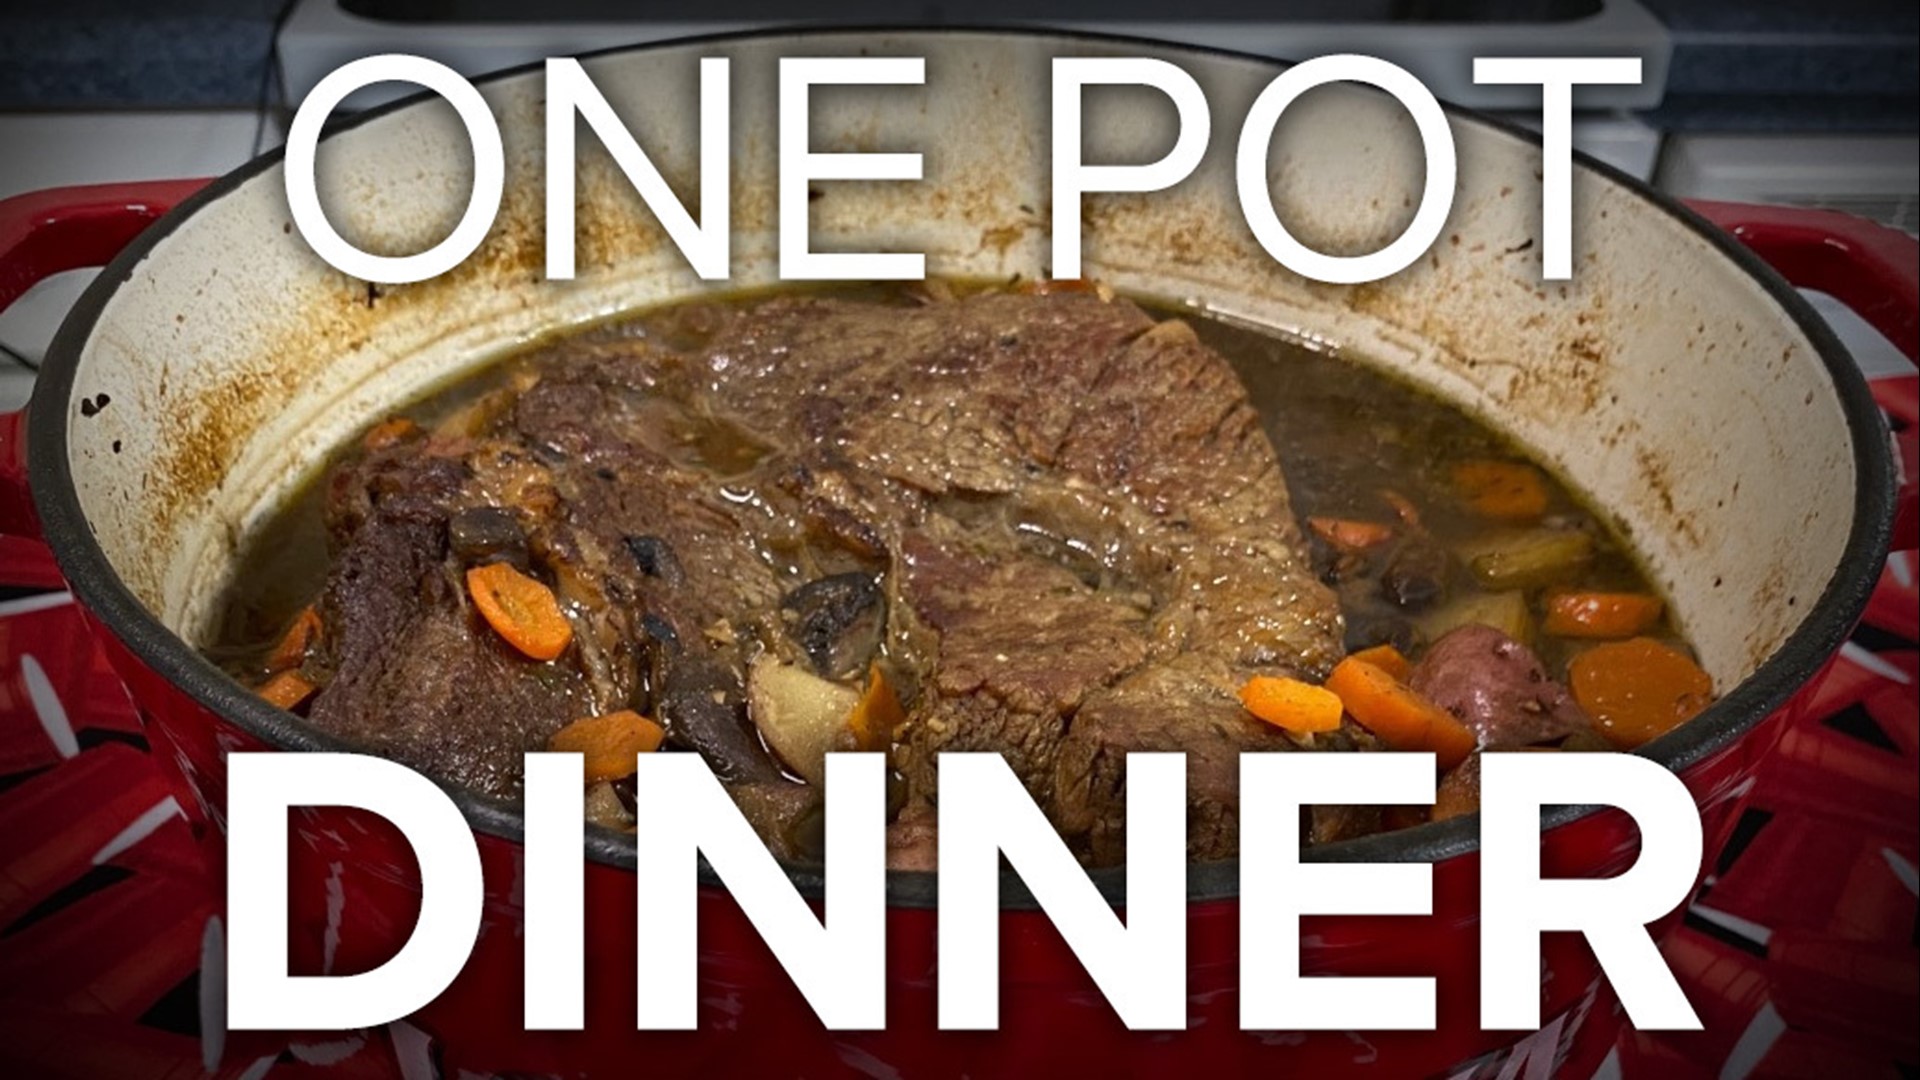 Chef Kevin's making dinner time easy by cooking everything in ONE pot this week!